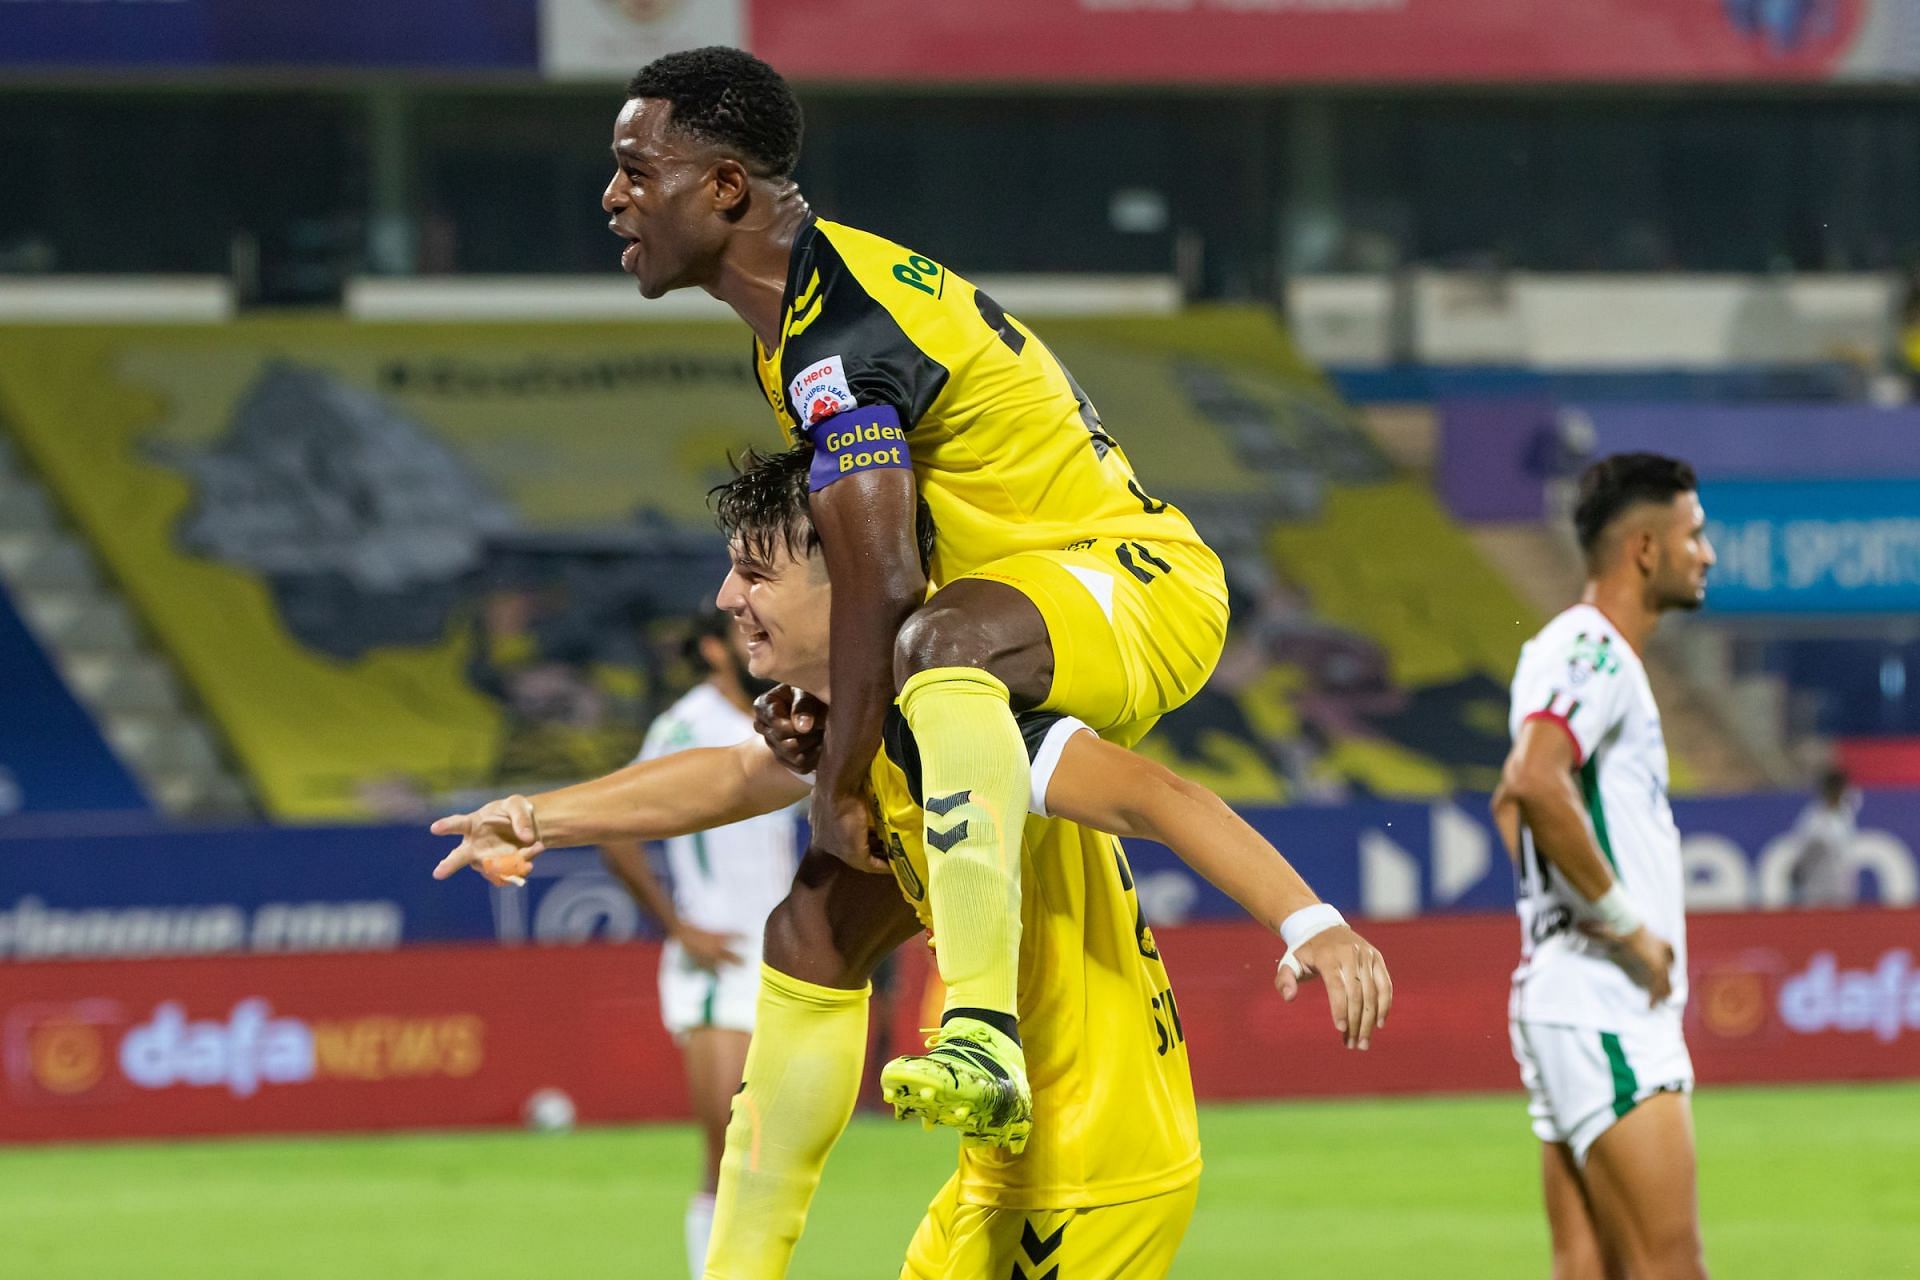 Javier Siverio and Bartholomew Ogbeche scored to secure the victory for the Nizams (Image courtesy: ISL Media)